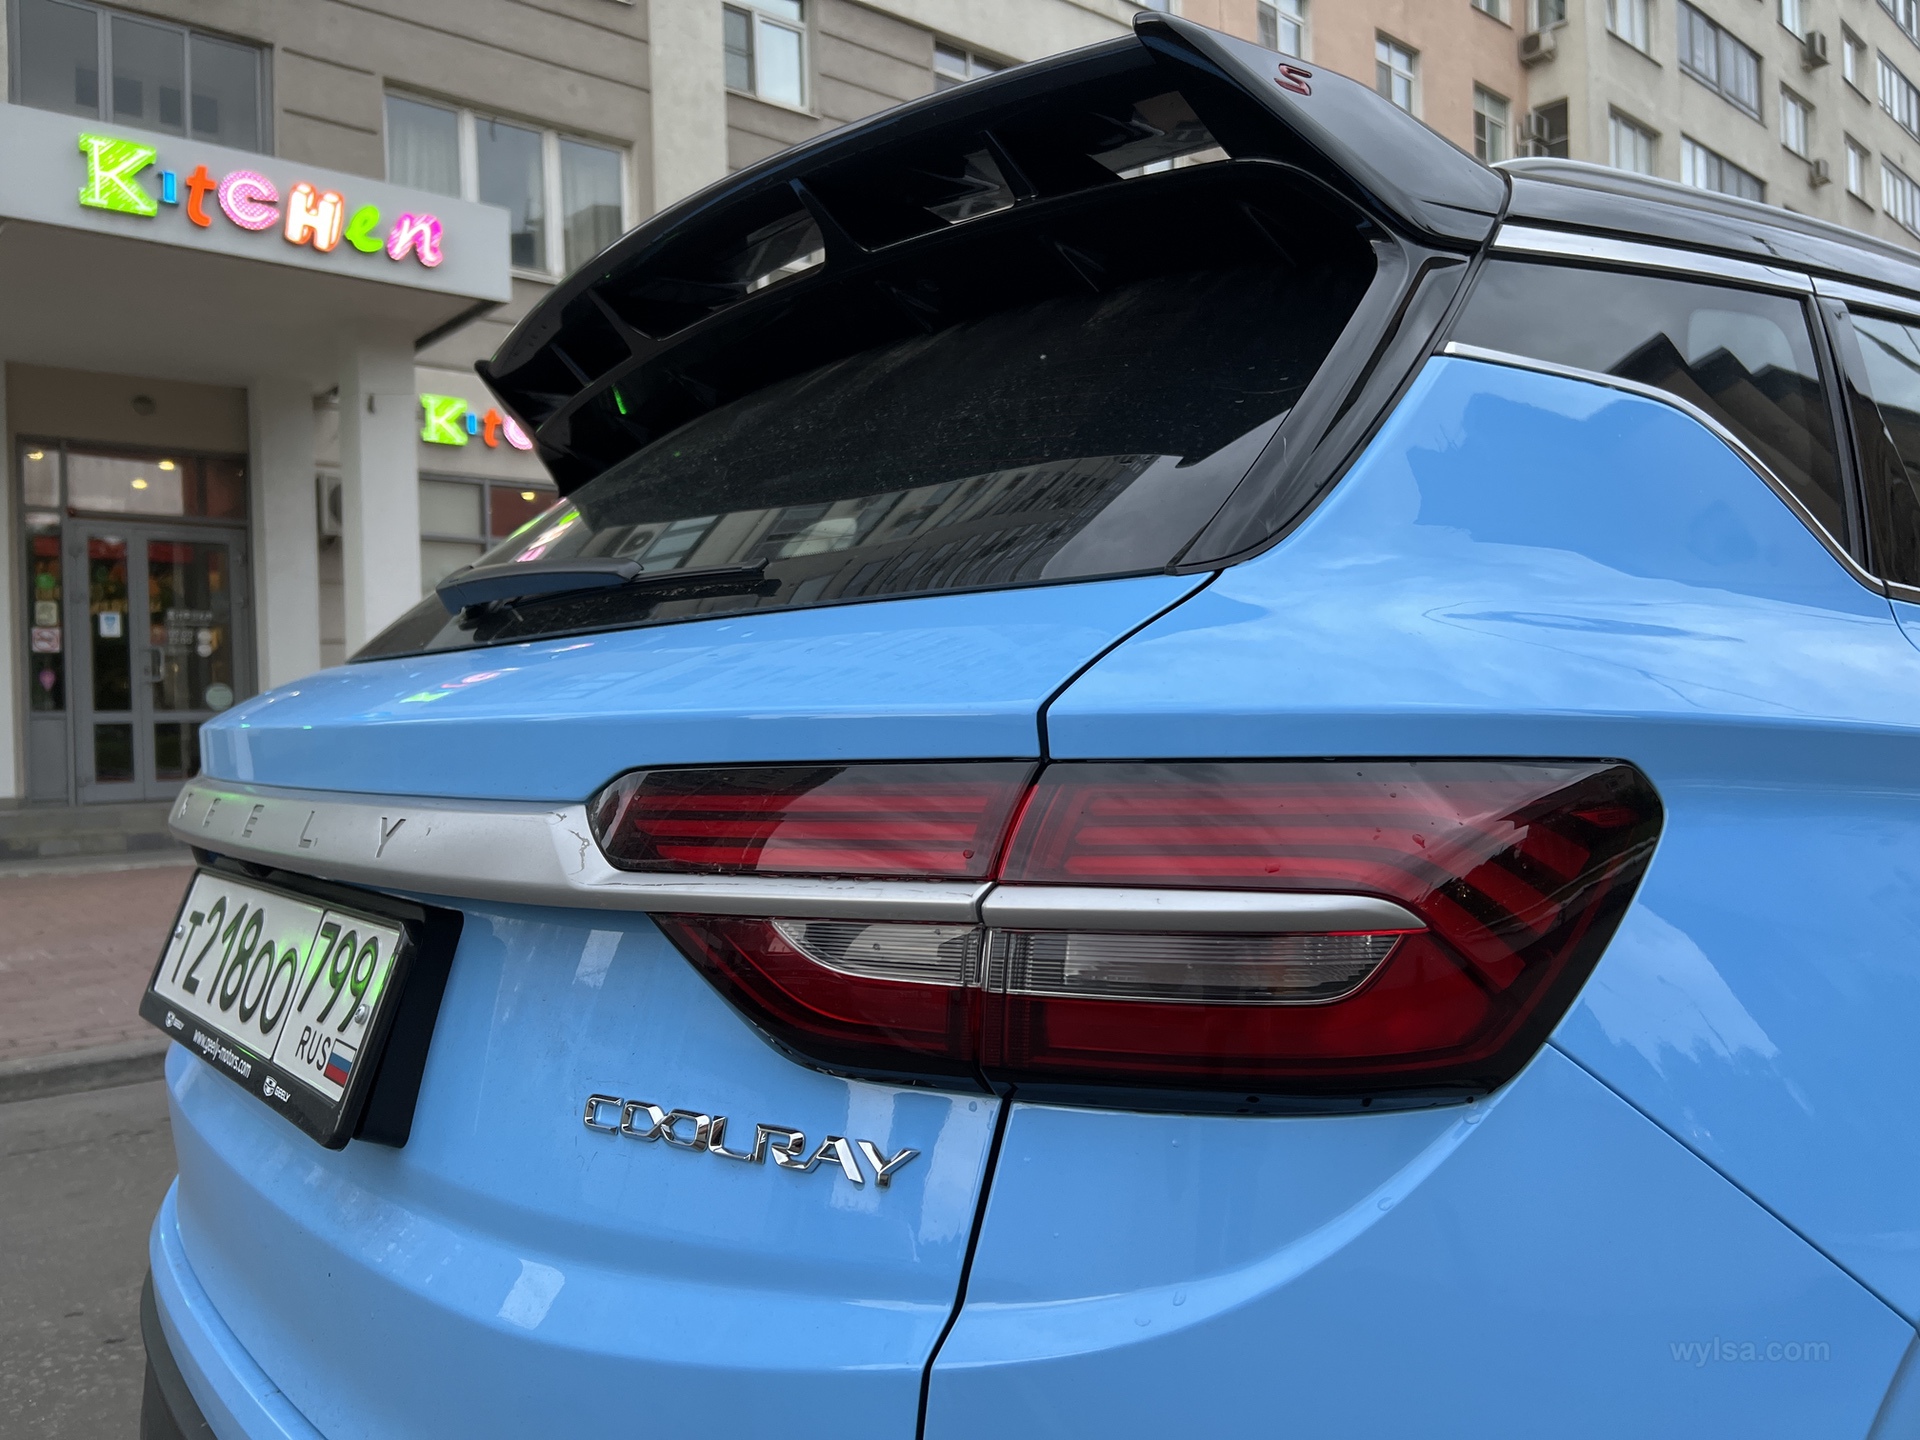 Wylsadrive: Geely Coolray